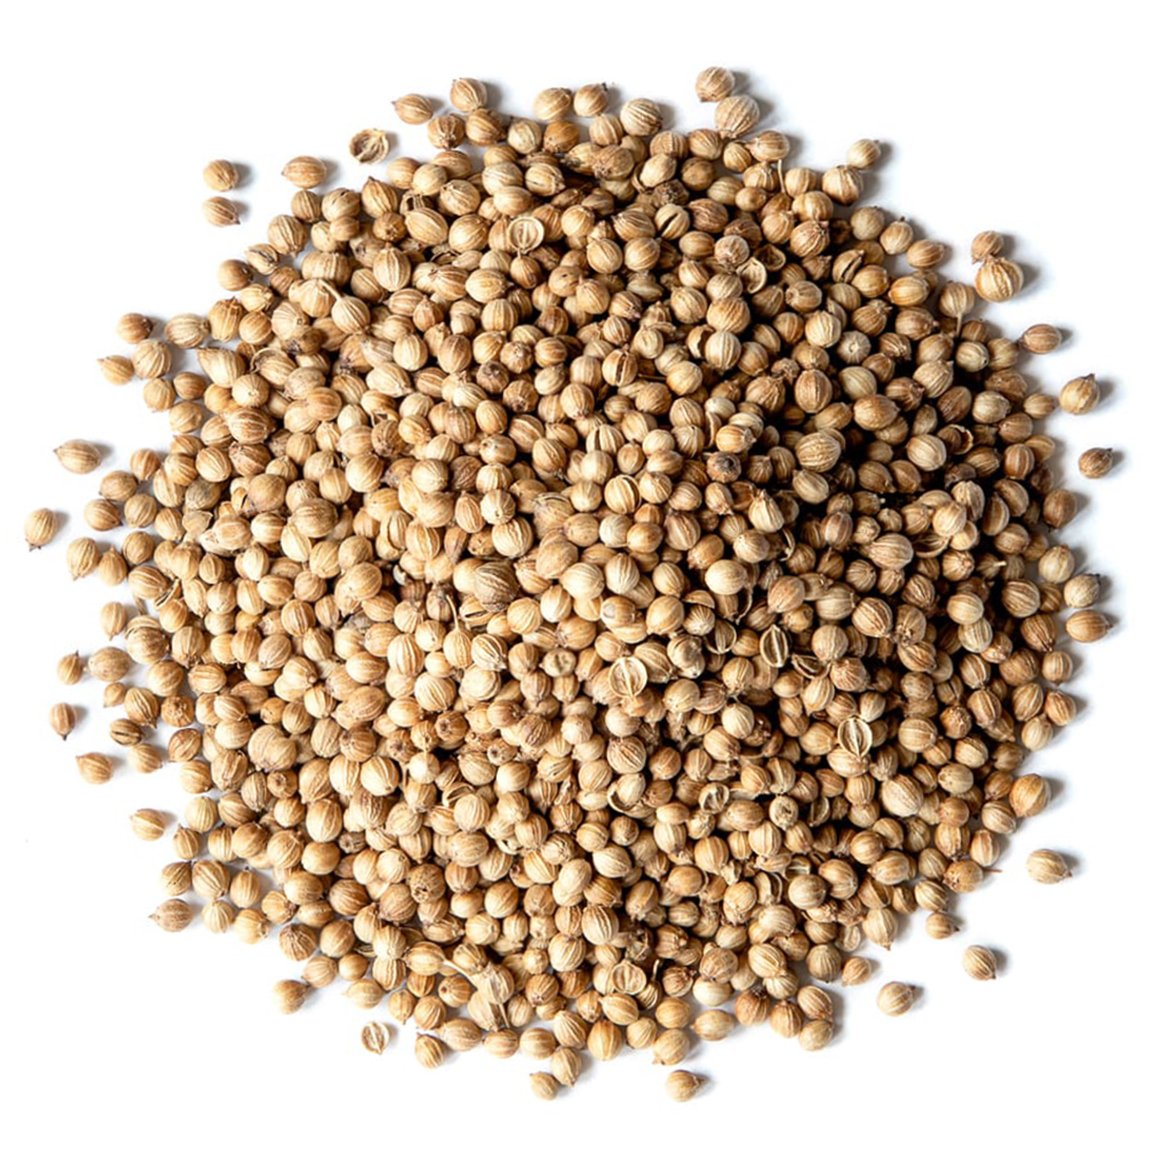 Coriander Seeds (Whole) 100g - TRS